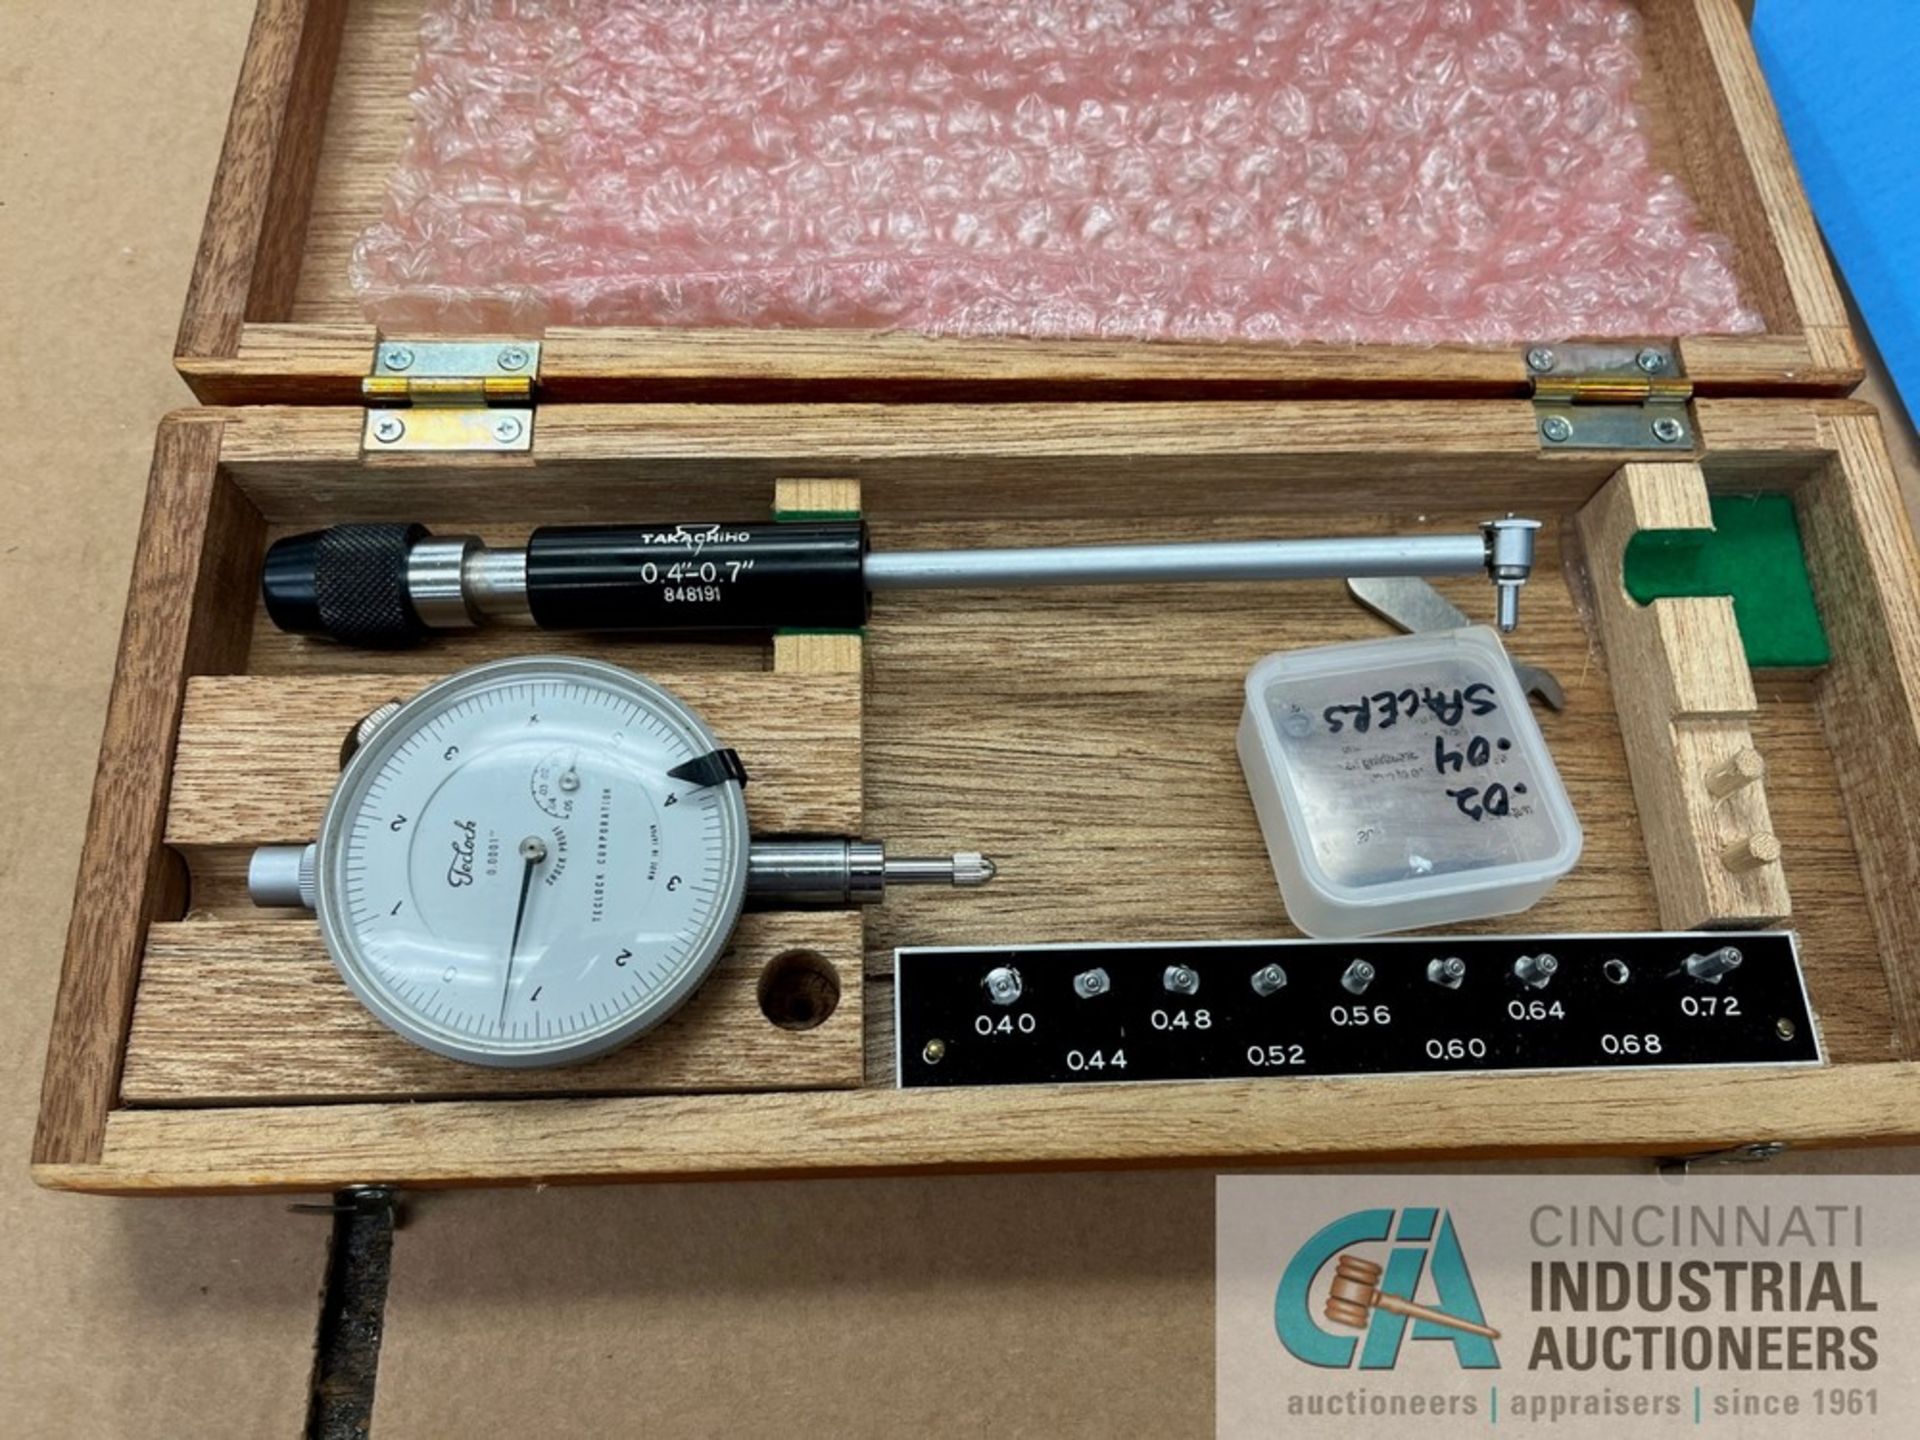 FOWLER MODEL SBX DIAL TYPE BORE GAGE AND .4 - .7" TAKACHINO DIAL TYPE BORE GAGE - Image 5 of 5